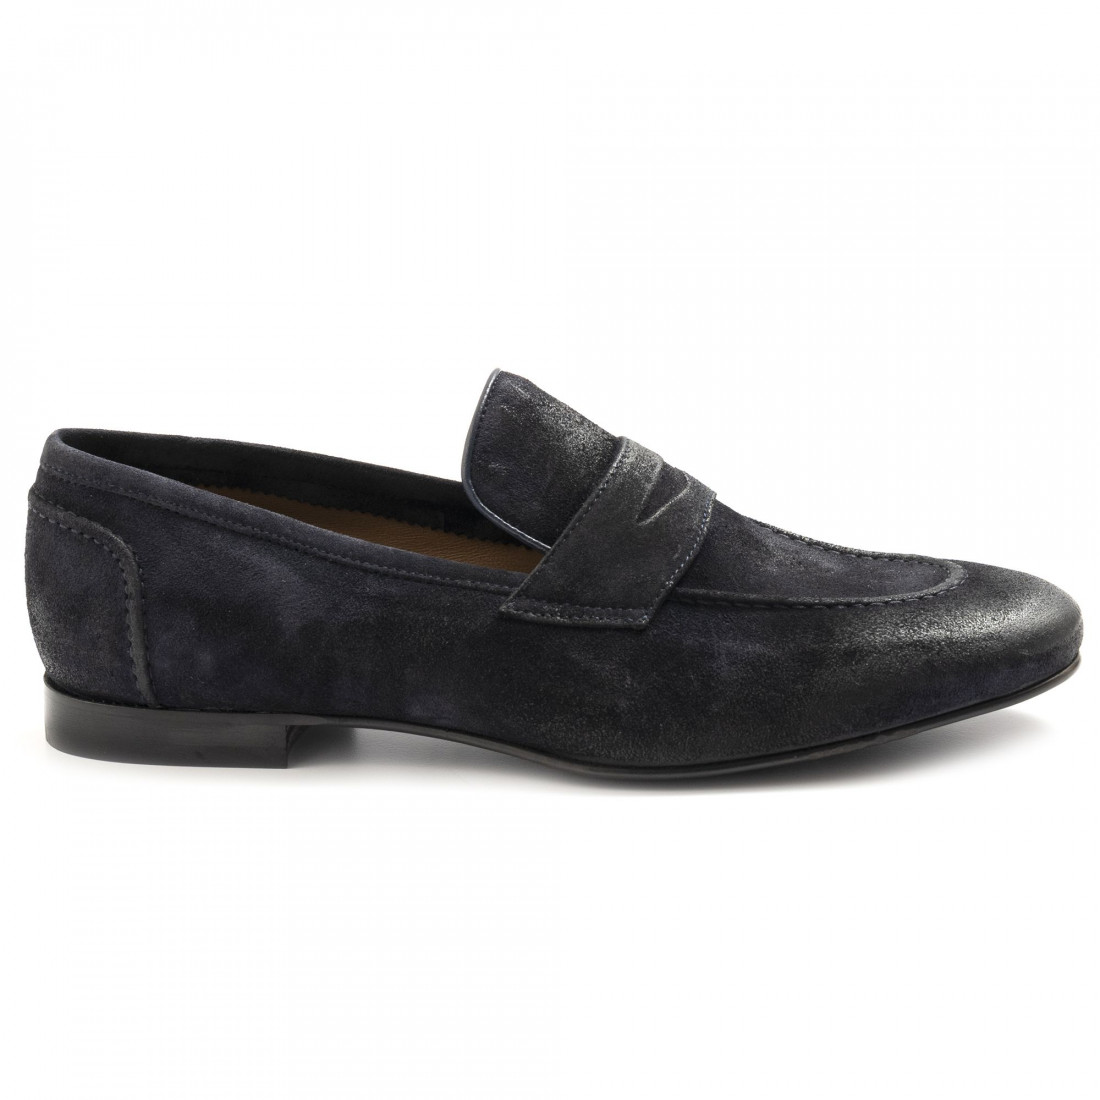 Men's Sangiorgio loafers in blue waxed suede